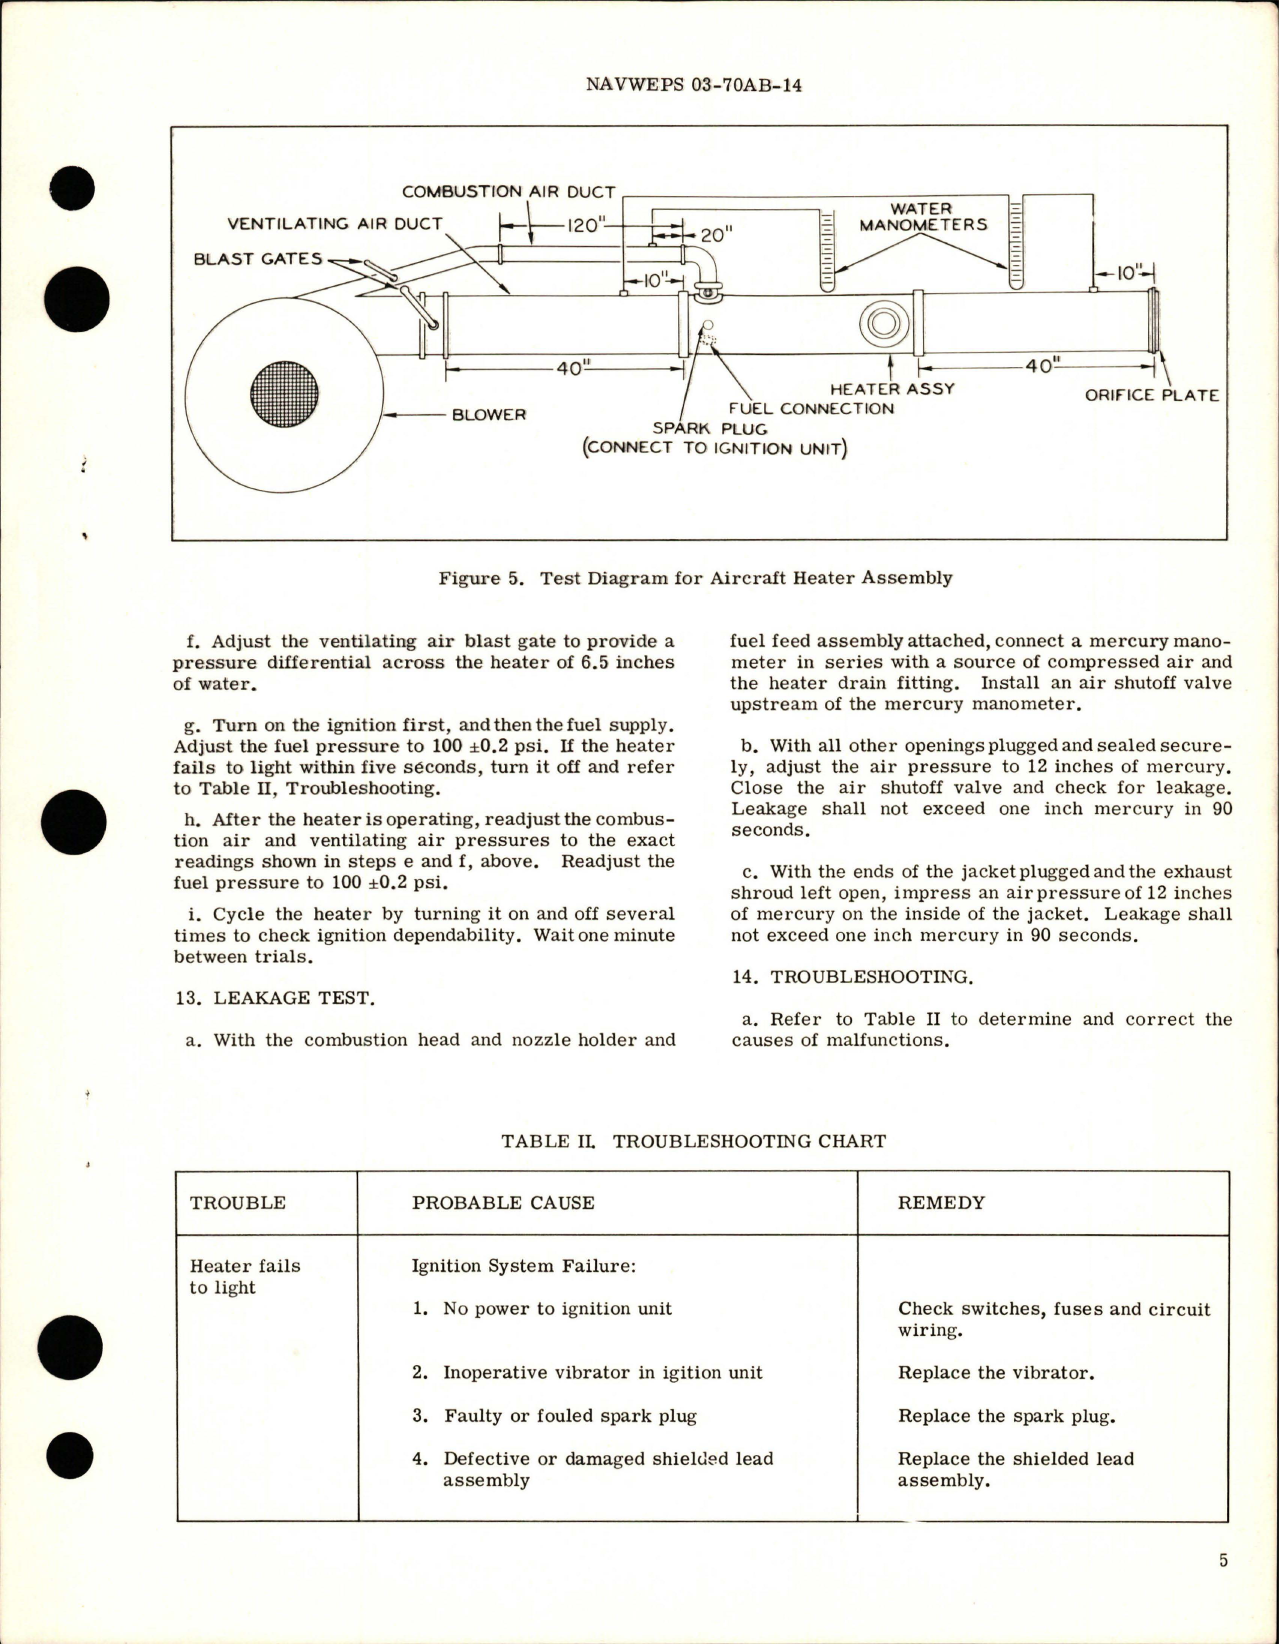 Sample page 5 from AirCorps Library document: Overhaul Instructions with Parts Breakdown for Aircraft Heater - Part A83C84 